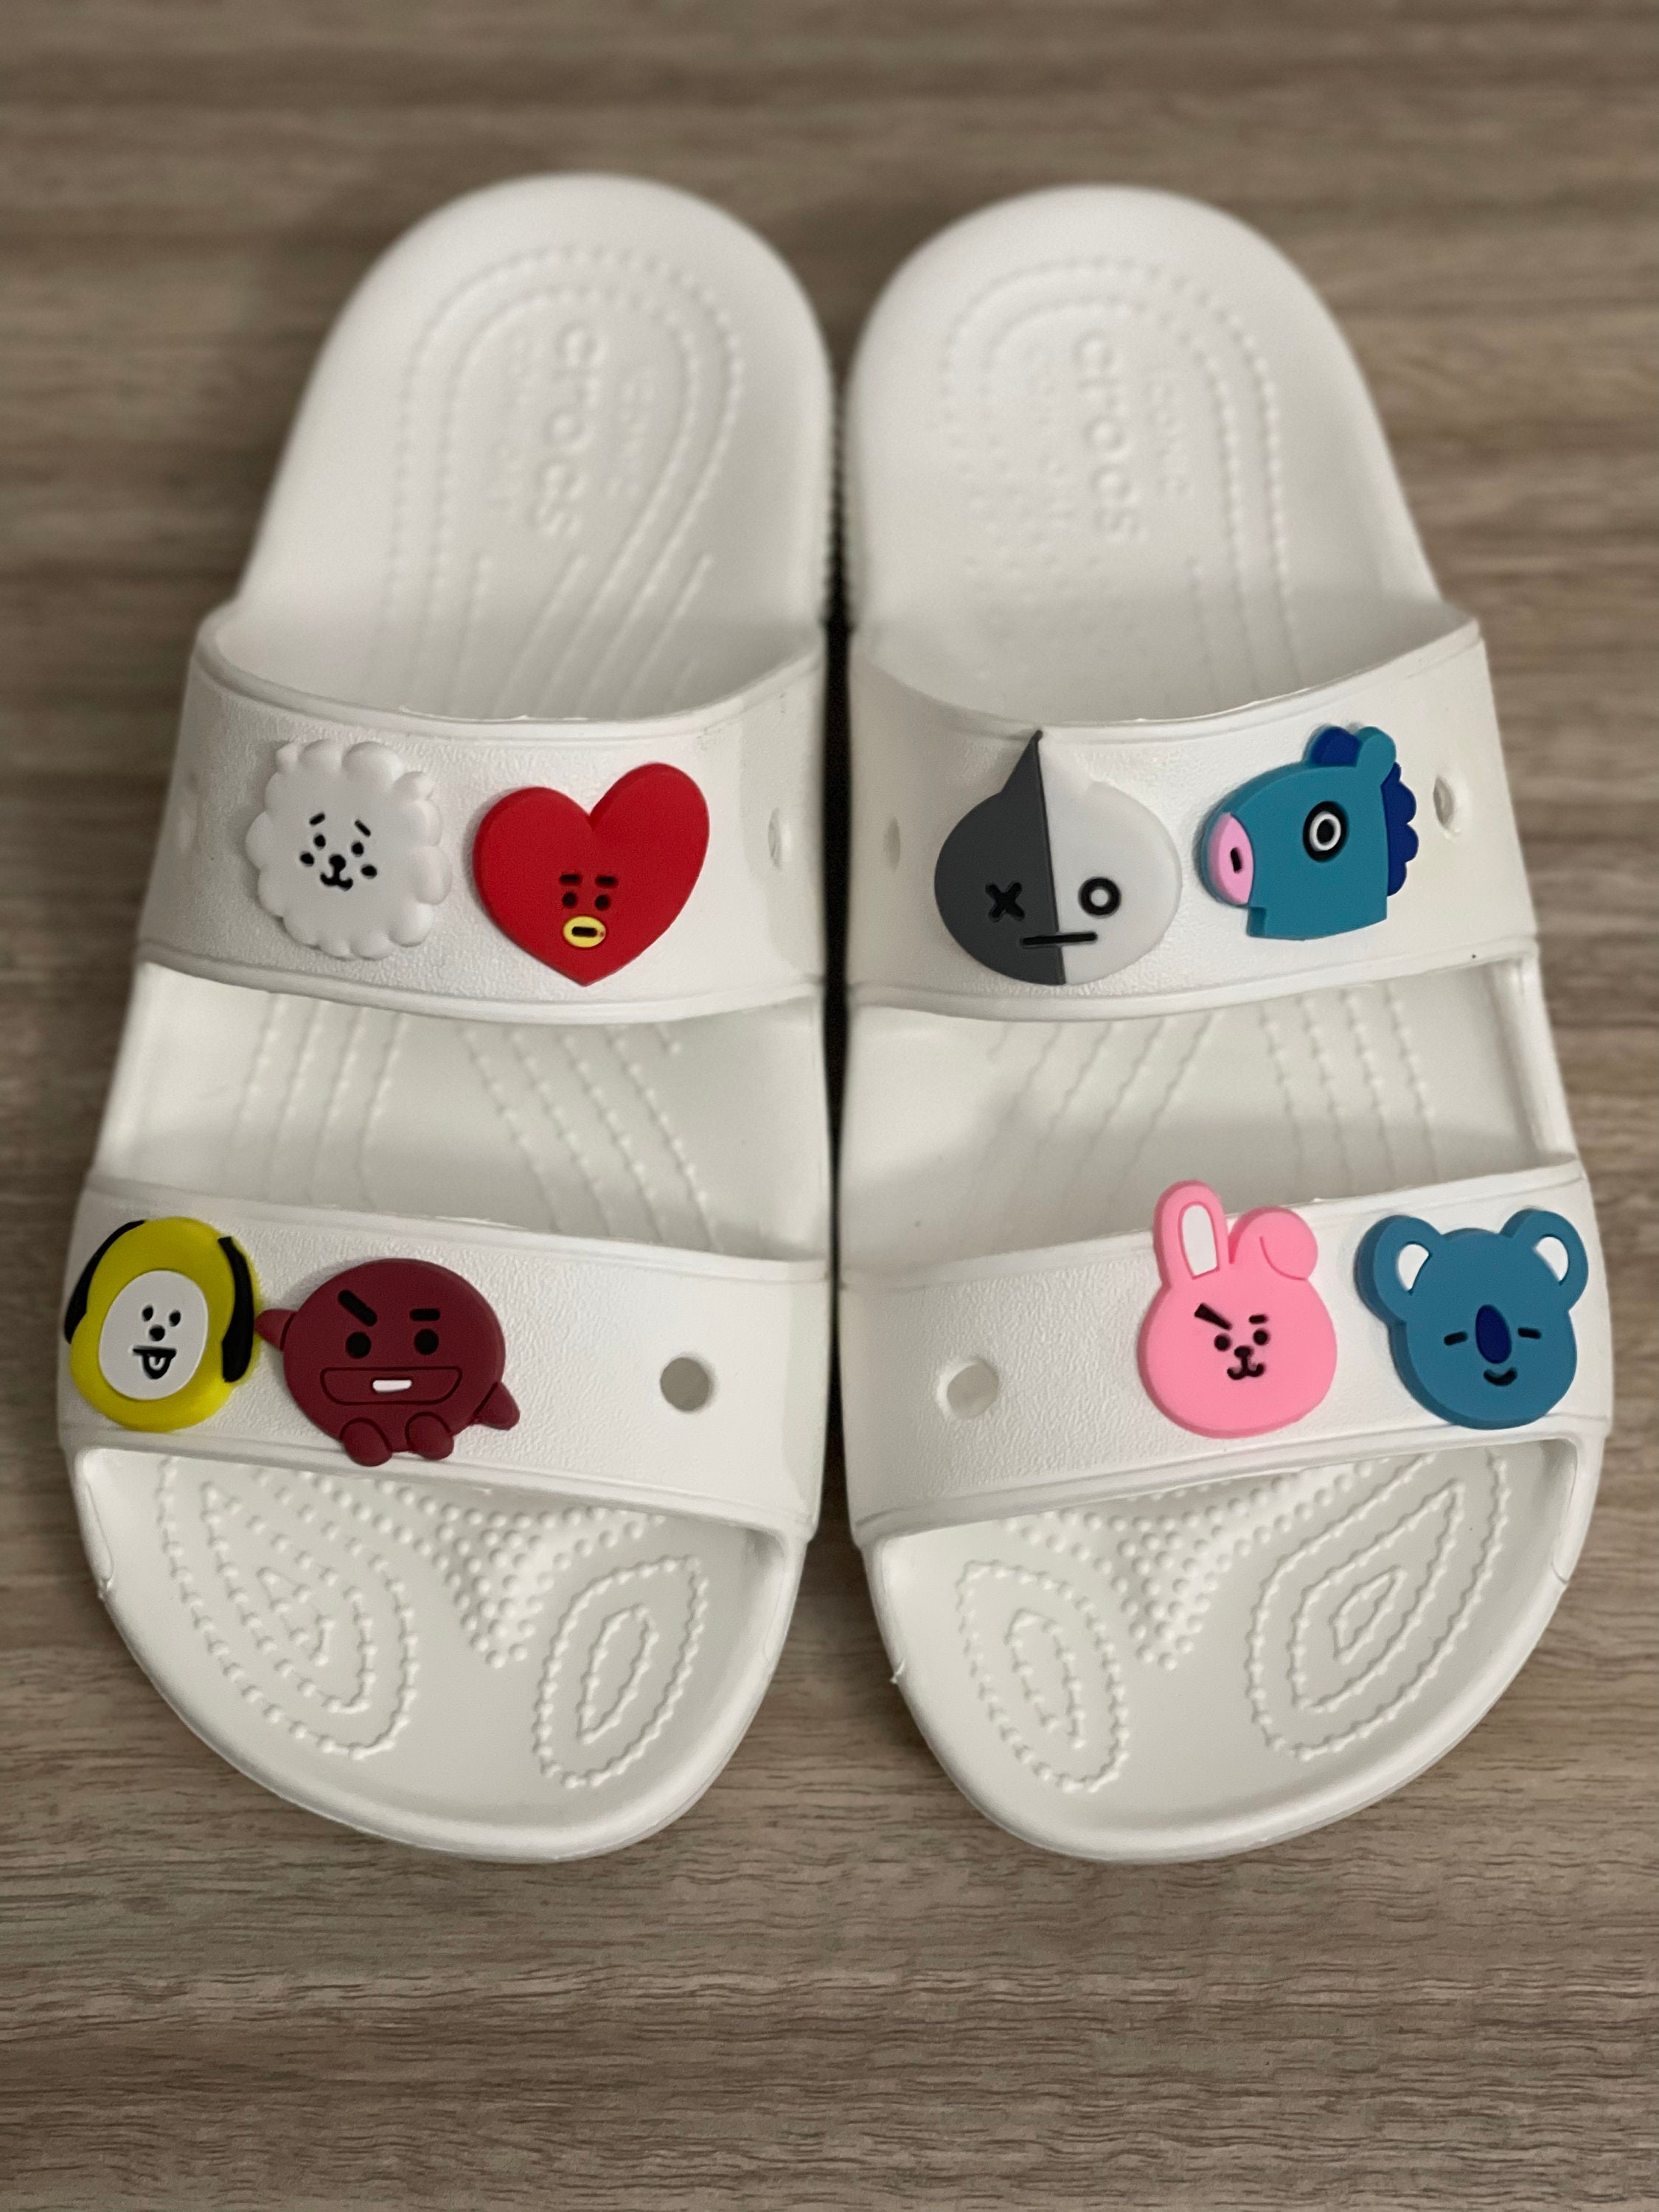 Shoe Charms BTS Inspired BT21 Crocs Charms BT21 Jibbits - Etsy